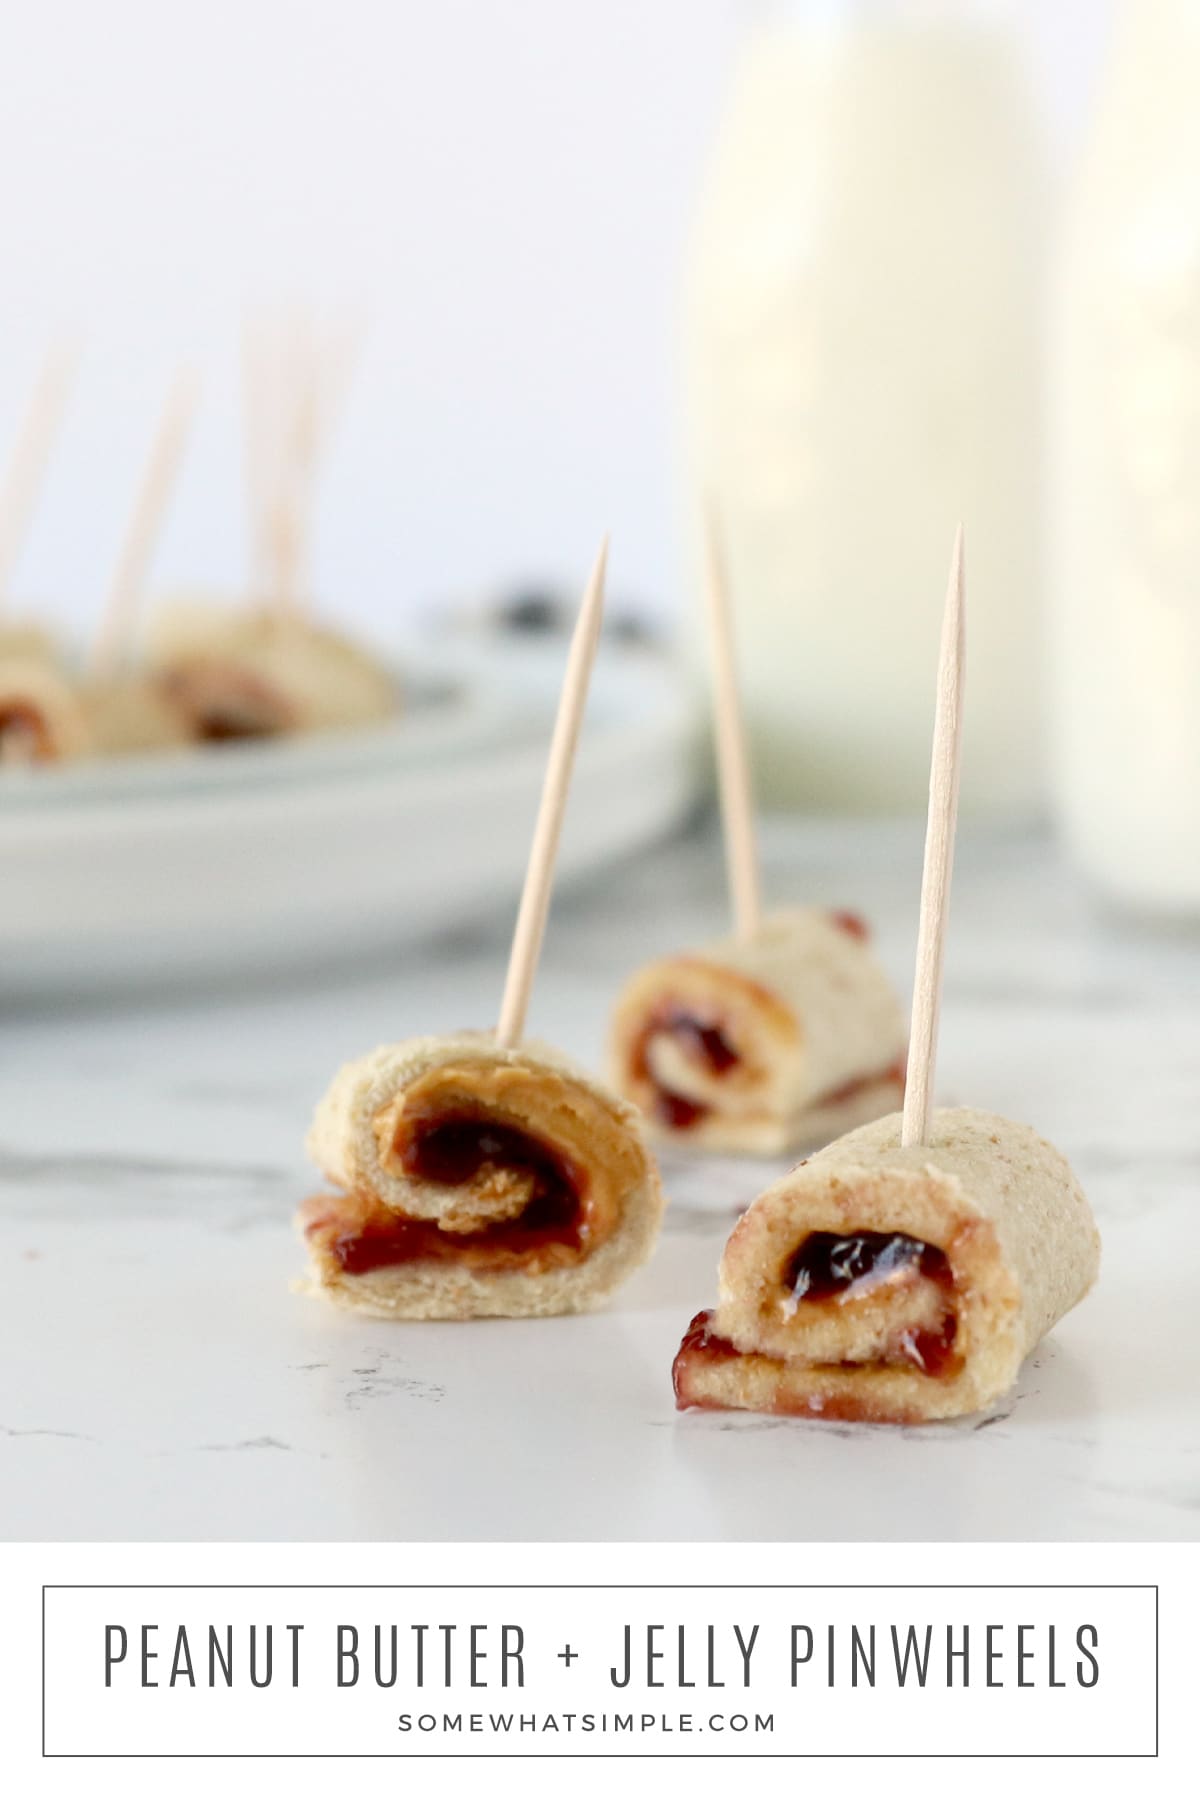 Easy to make and fun to devour, these peanut butter and jelly pinwheel sandwiches make the perfect lunch or snack! via @somewhatsimple